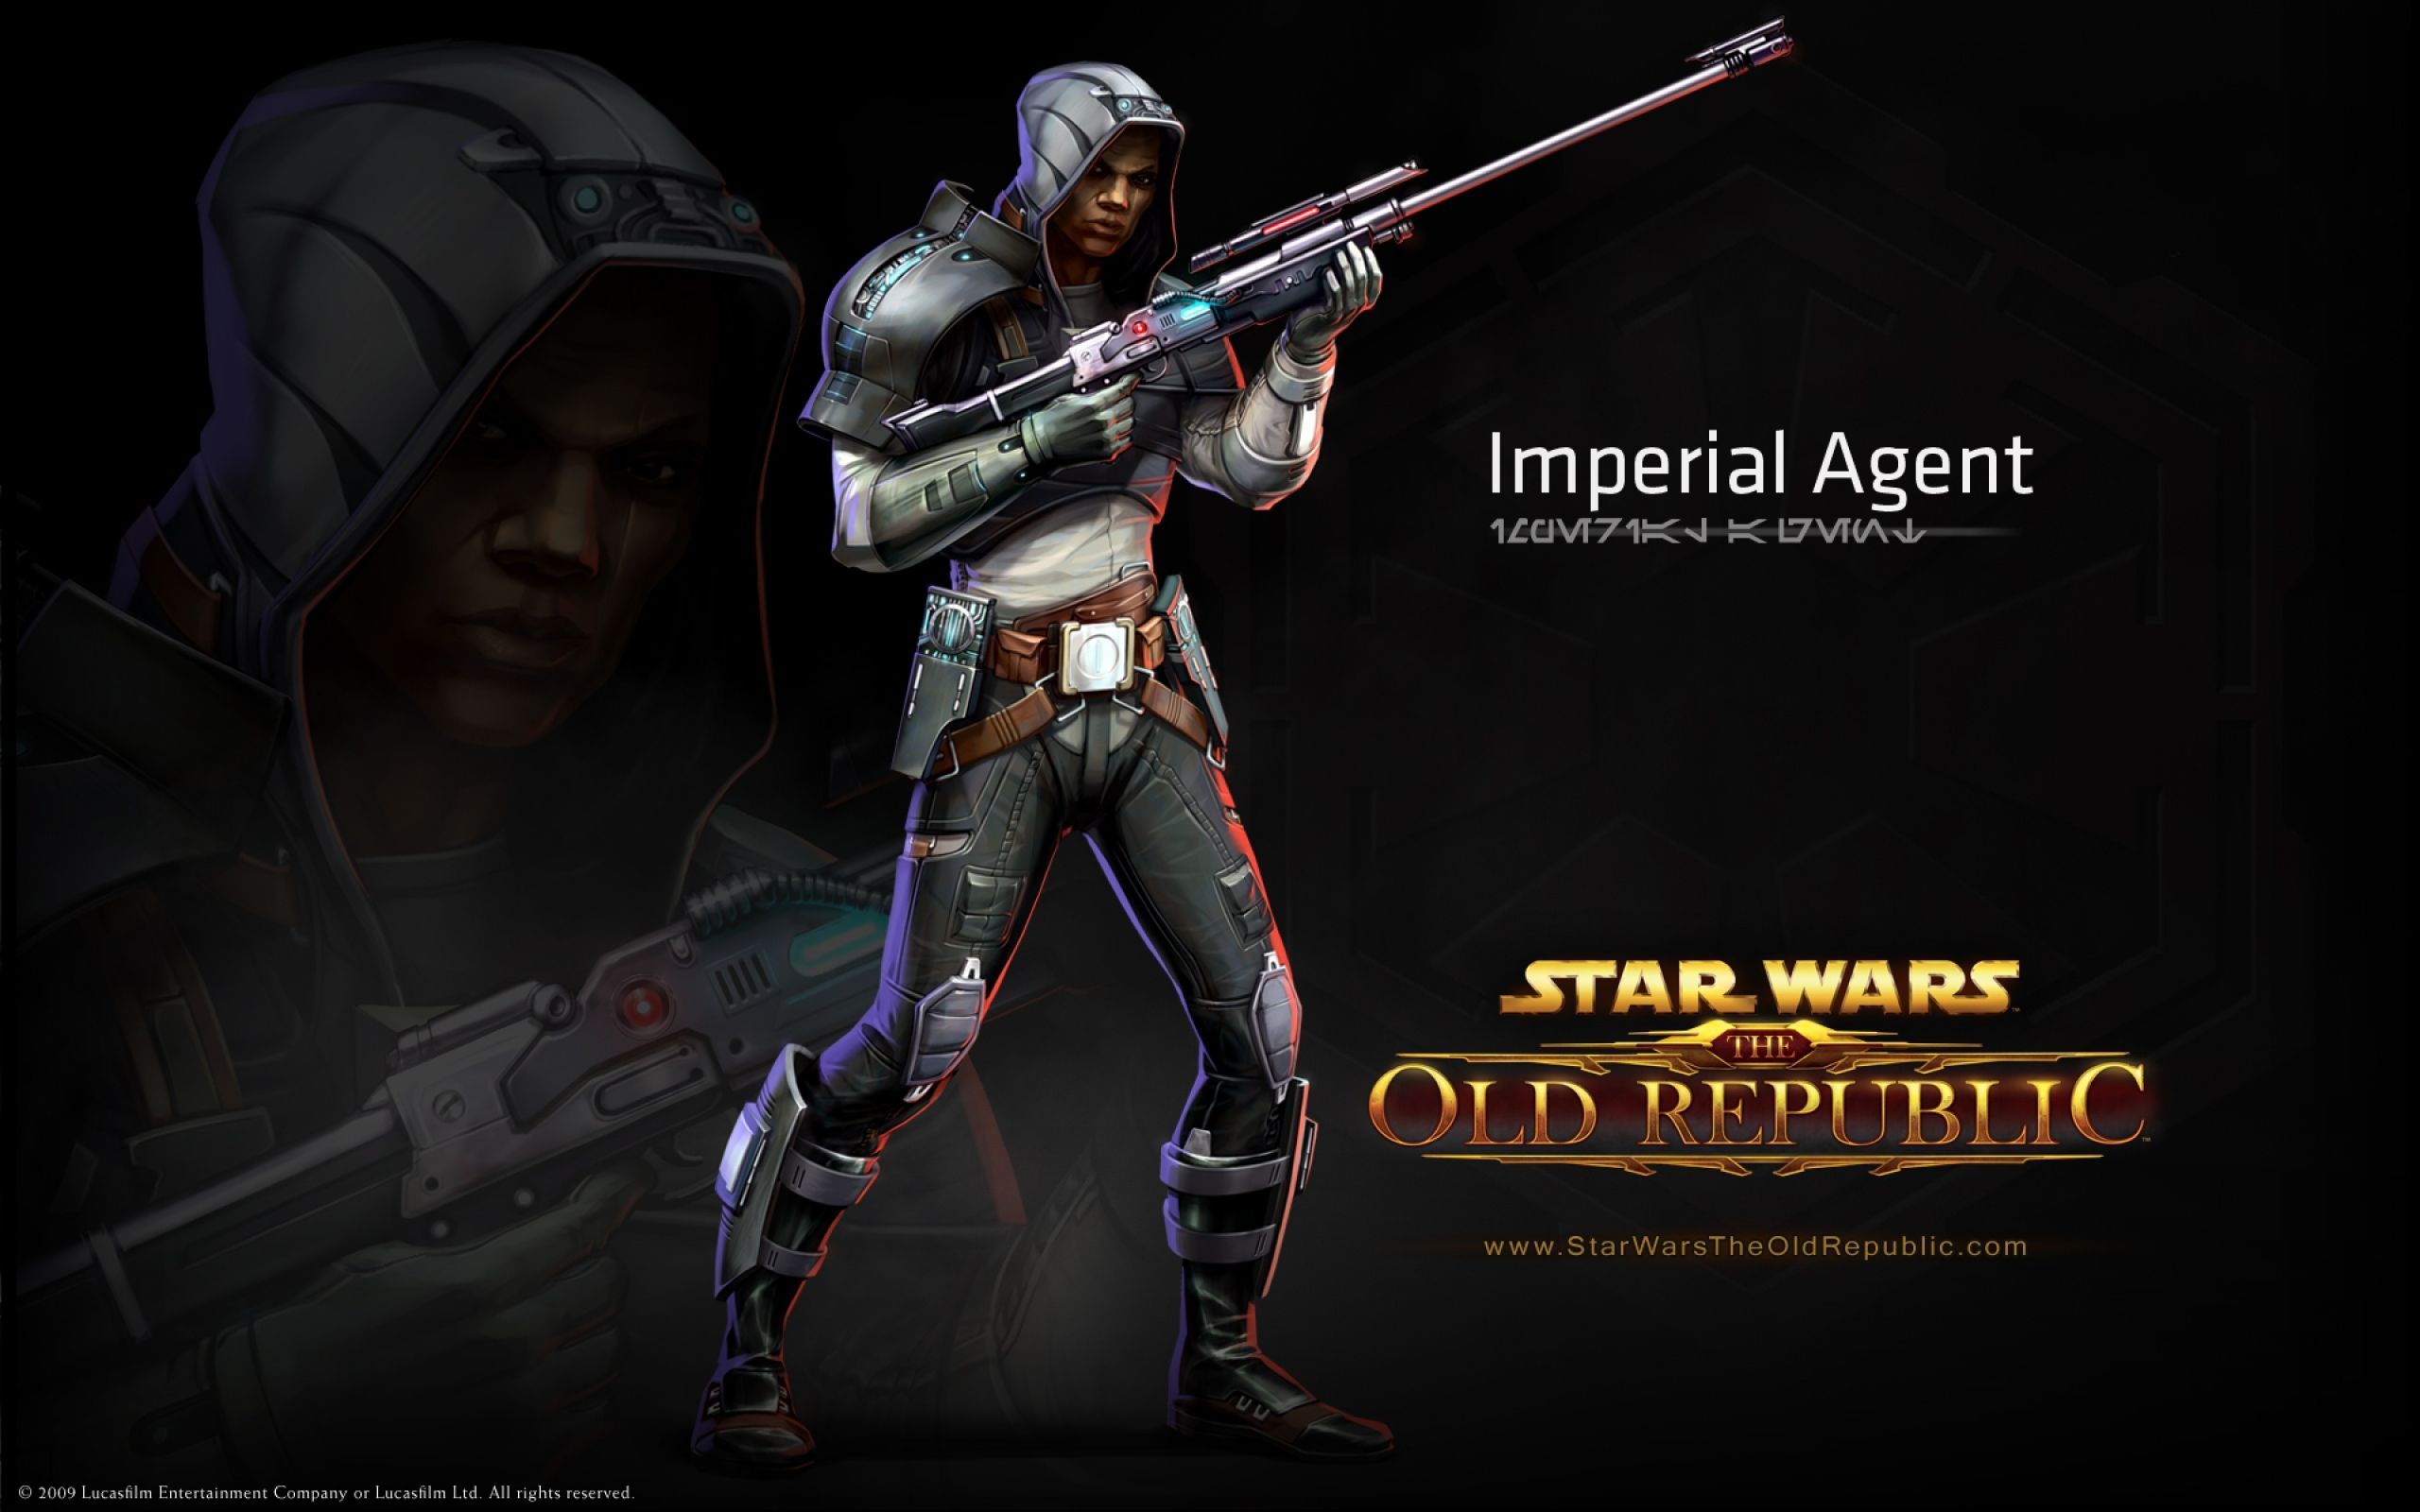 Imperial Agent: Swtor Computer Wallpapers, Desktop Backgrounds ...